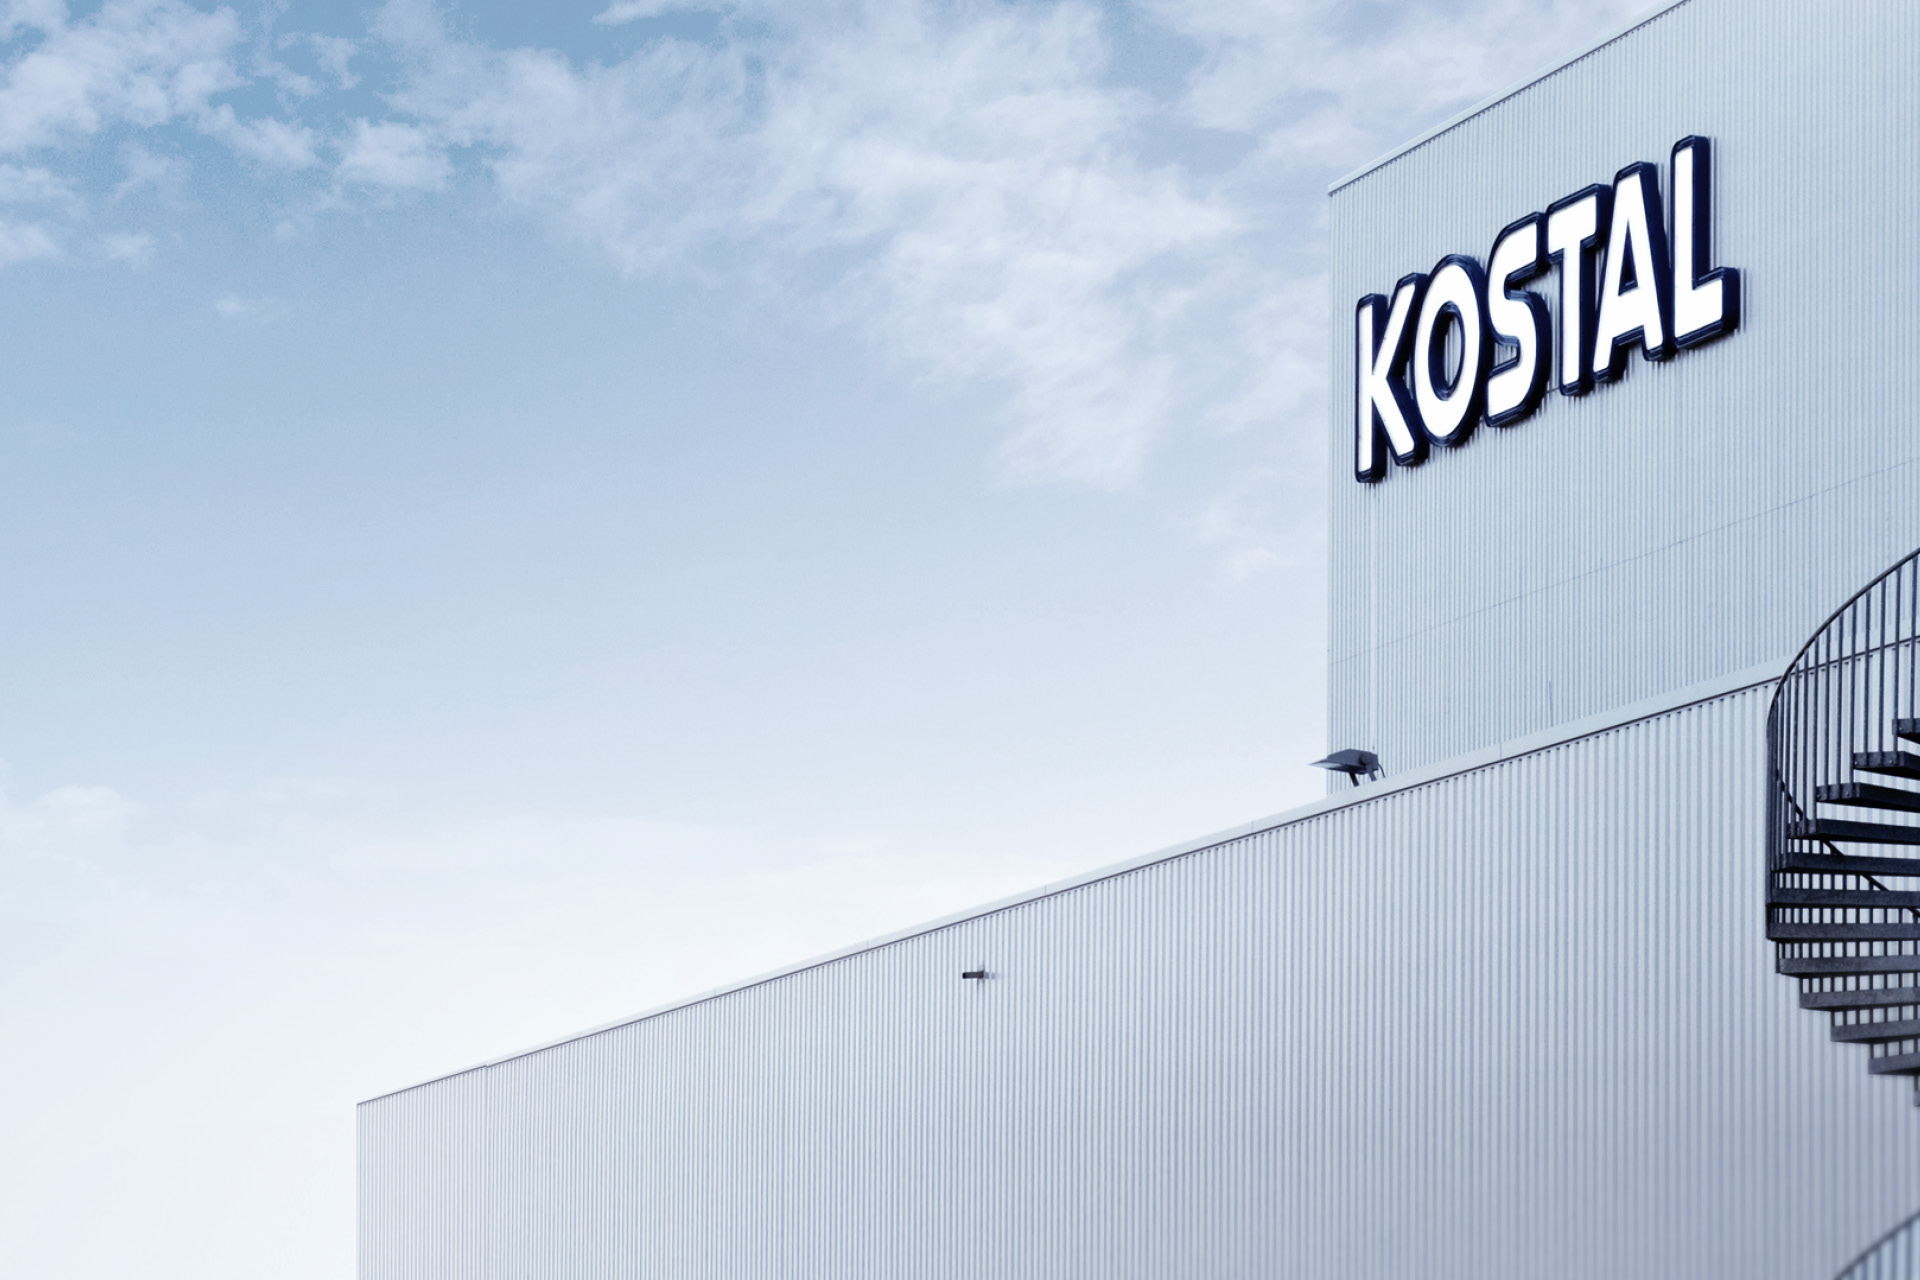 KOSTAL Chargings Solutions is part of the KOSTAL Group